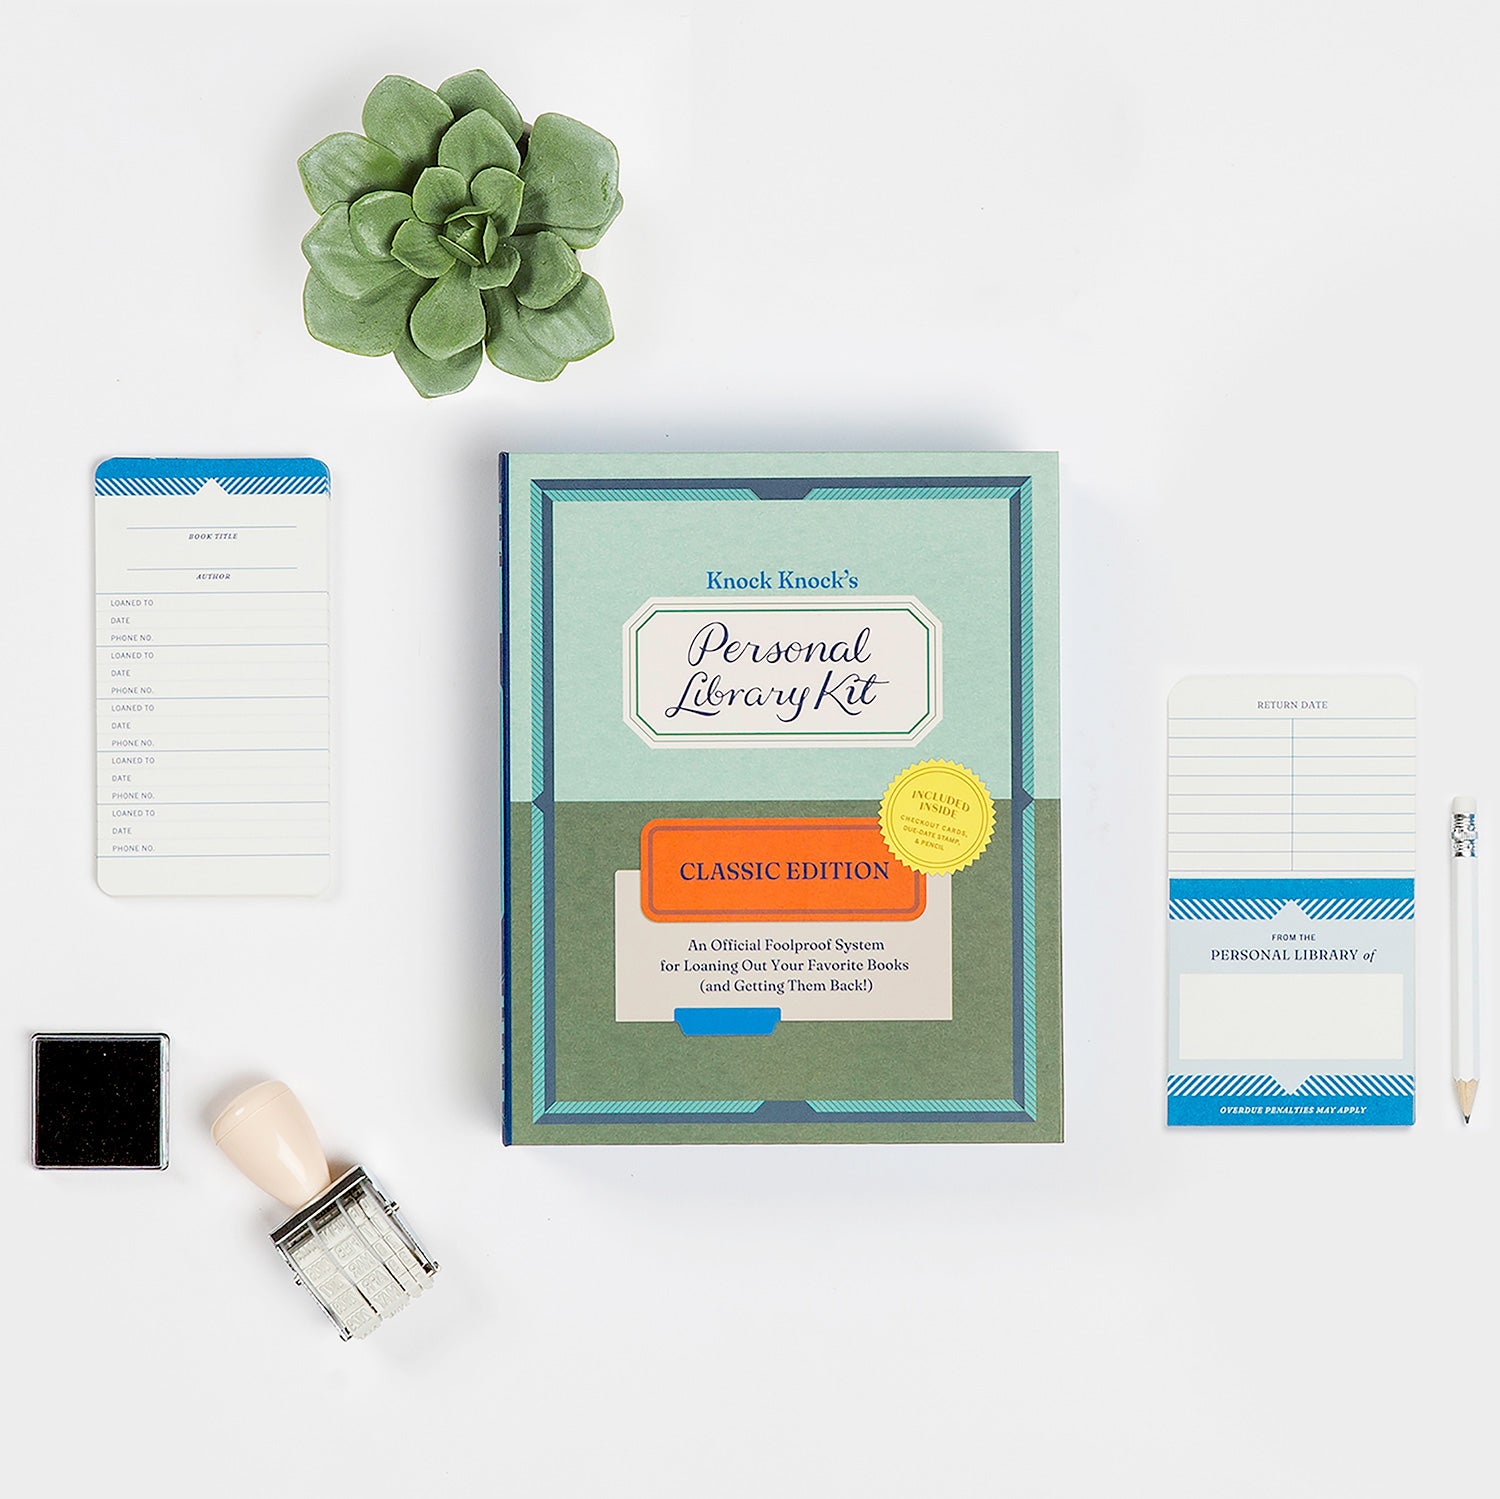 Personal Library Kit: Cookbook Edition by Knock Knock